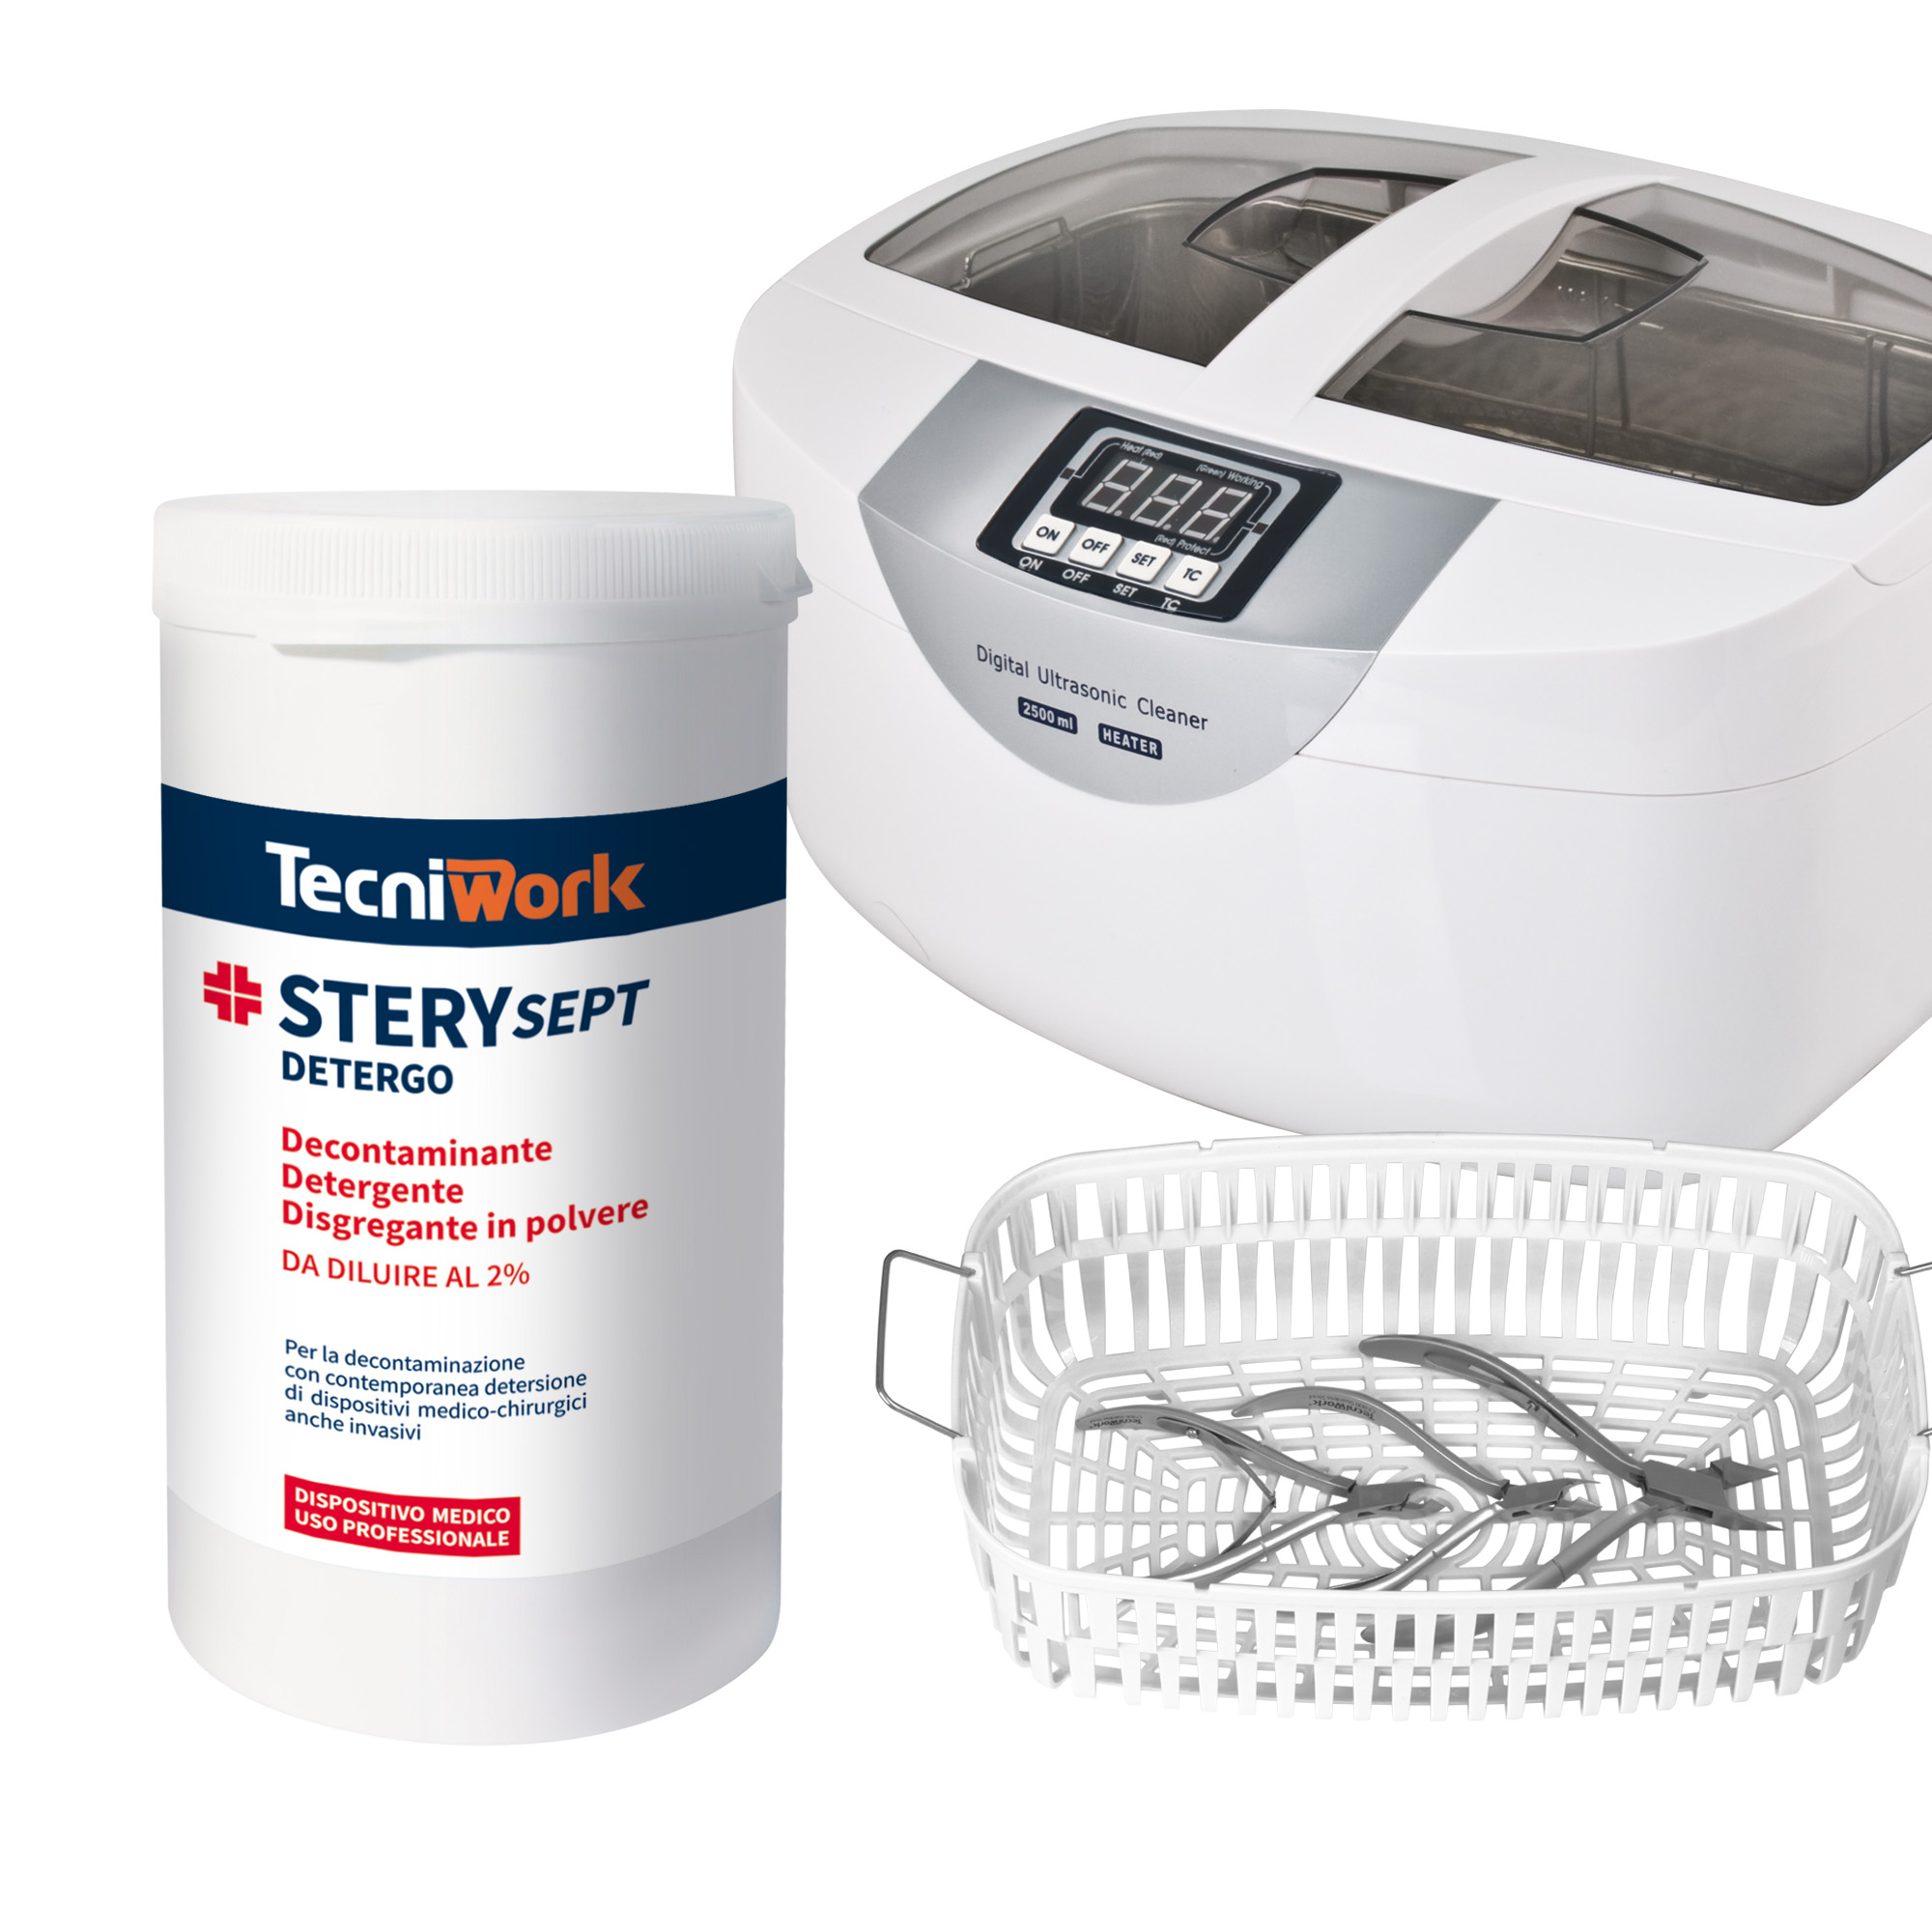 Cold decontaminant, disinfectant and steriliser for instruments with disintegrating enzymes Sterysept Detergo 1 kg